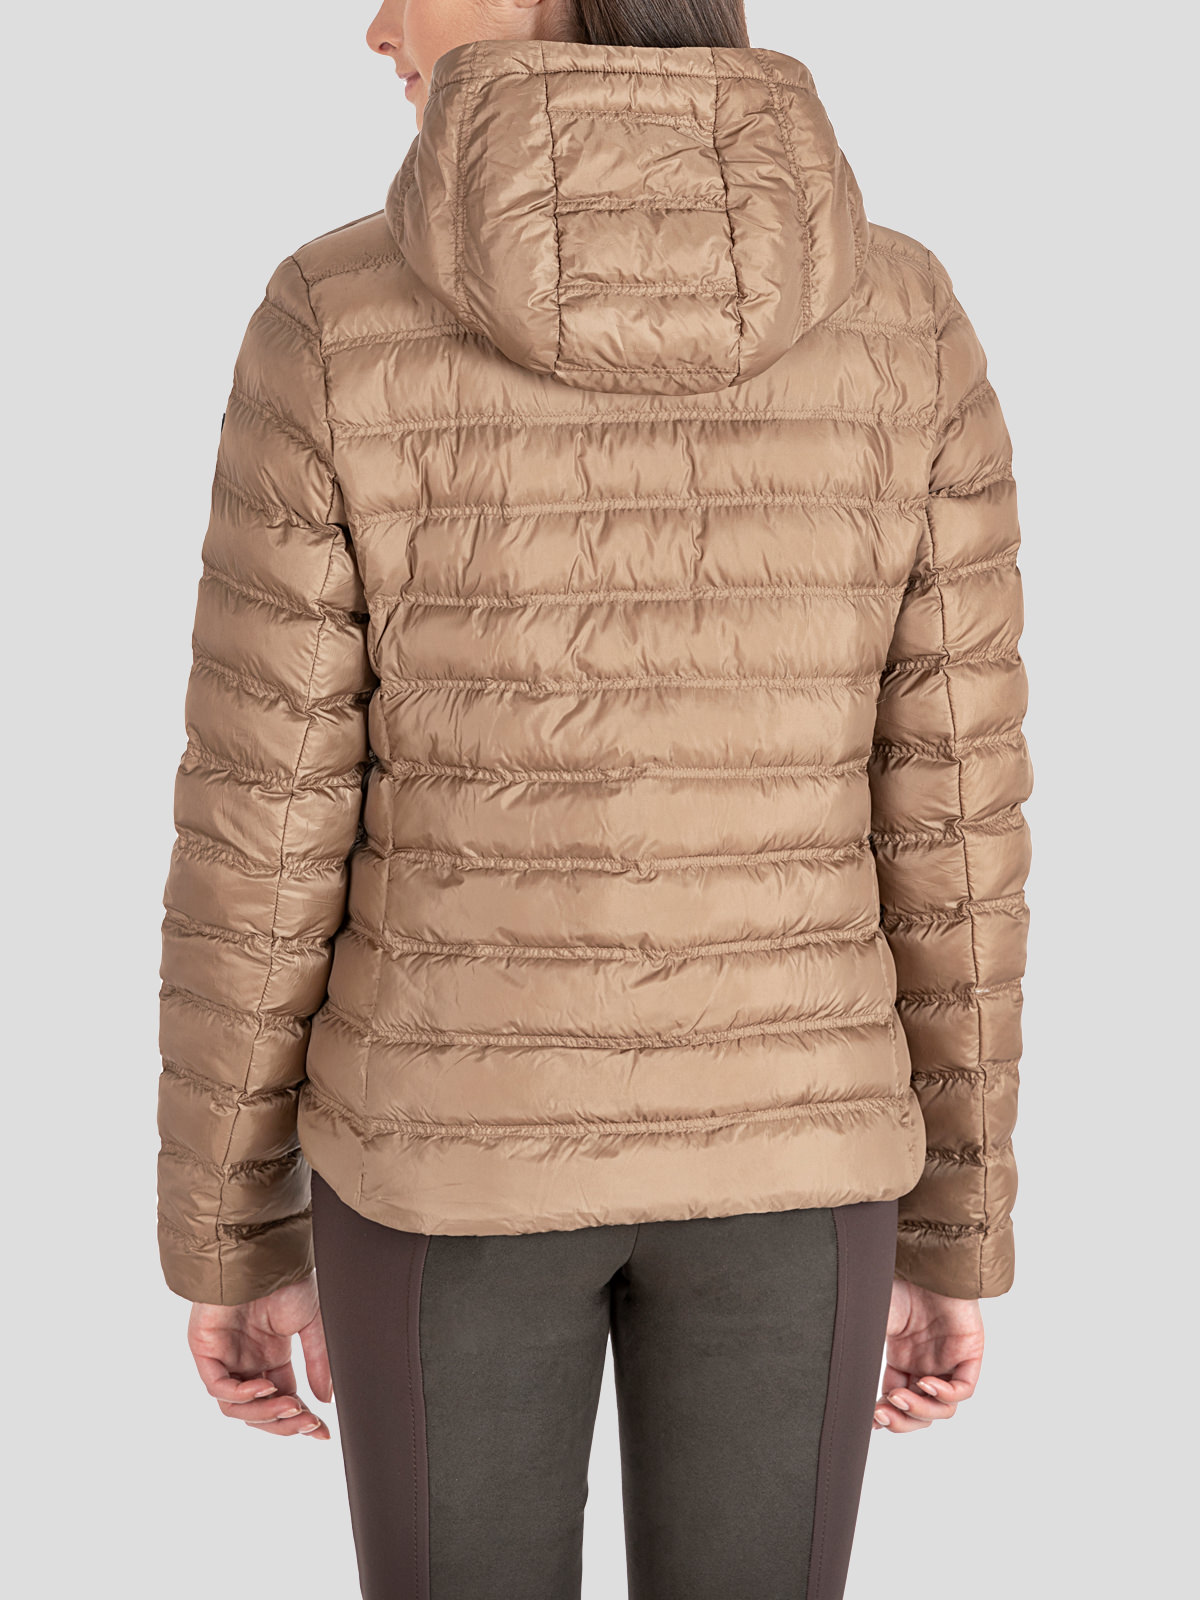 ECRE WOMEN'S PUFFER JACKET - Equiline America